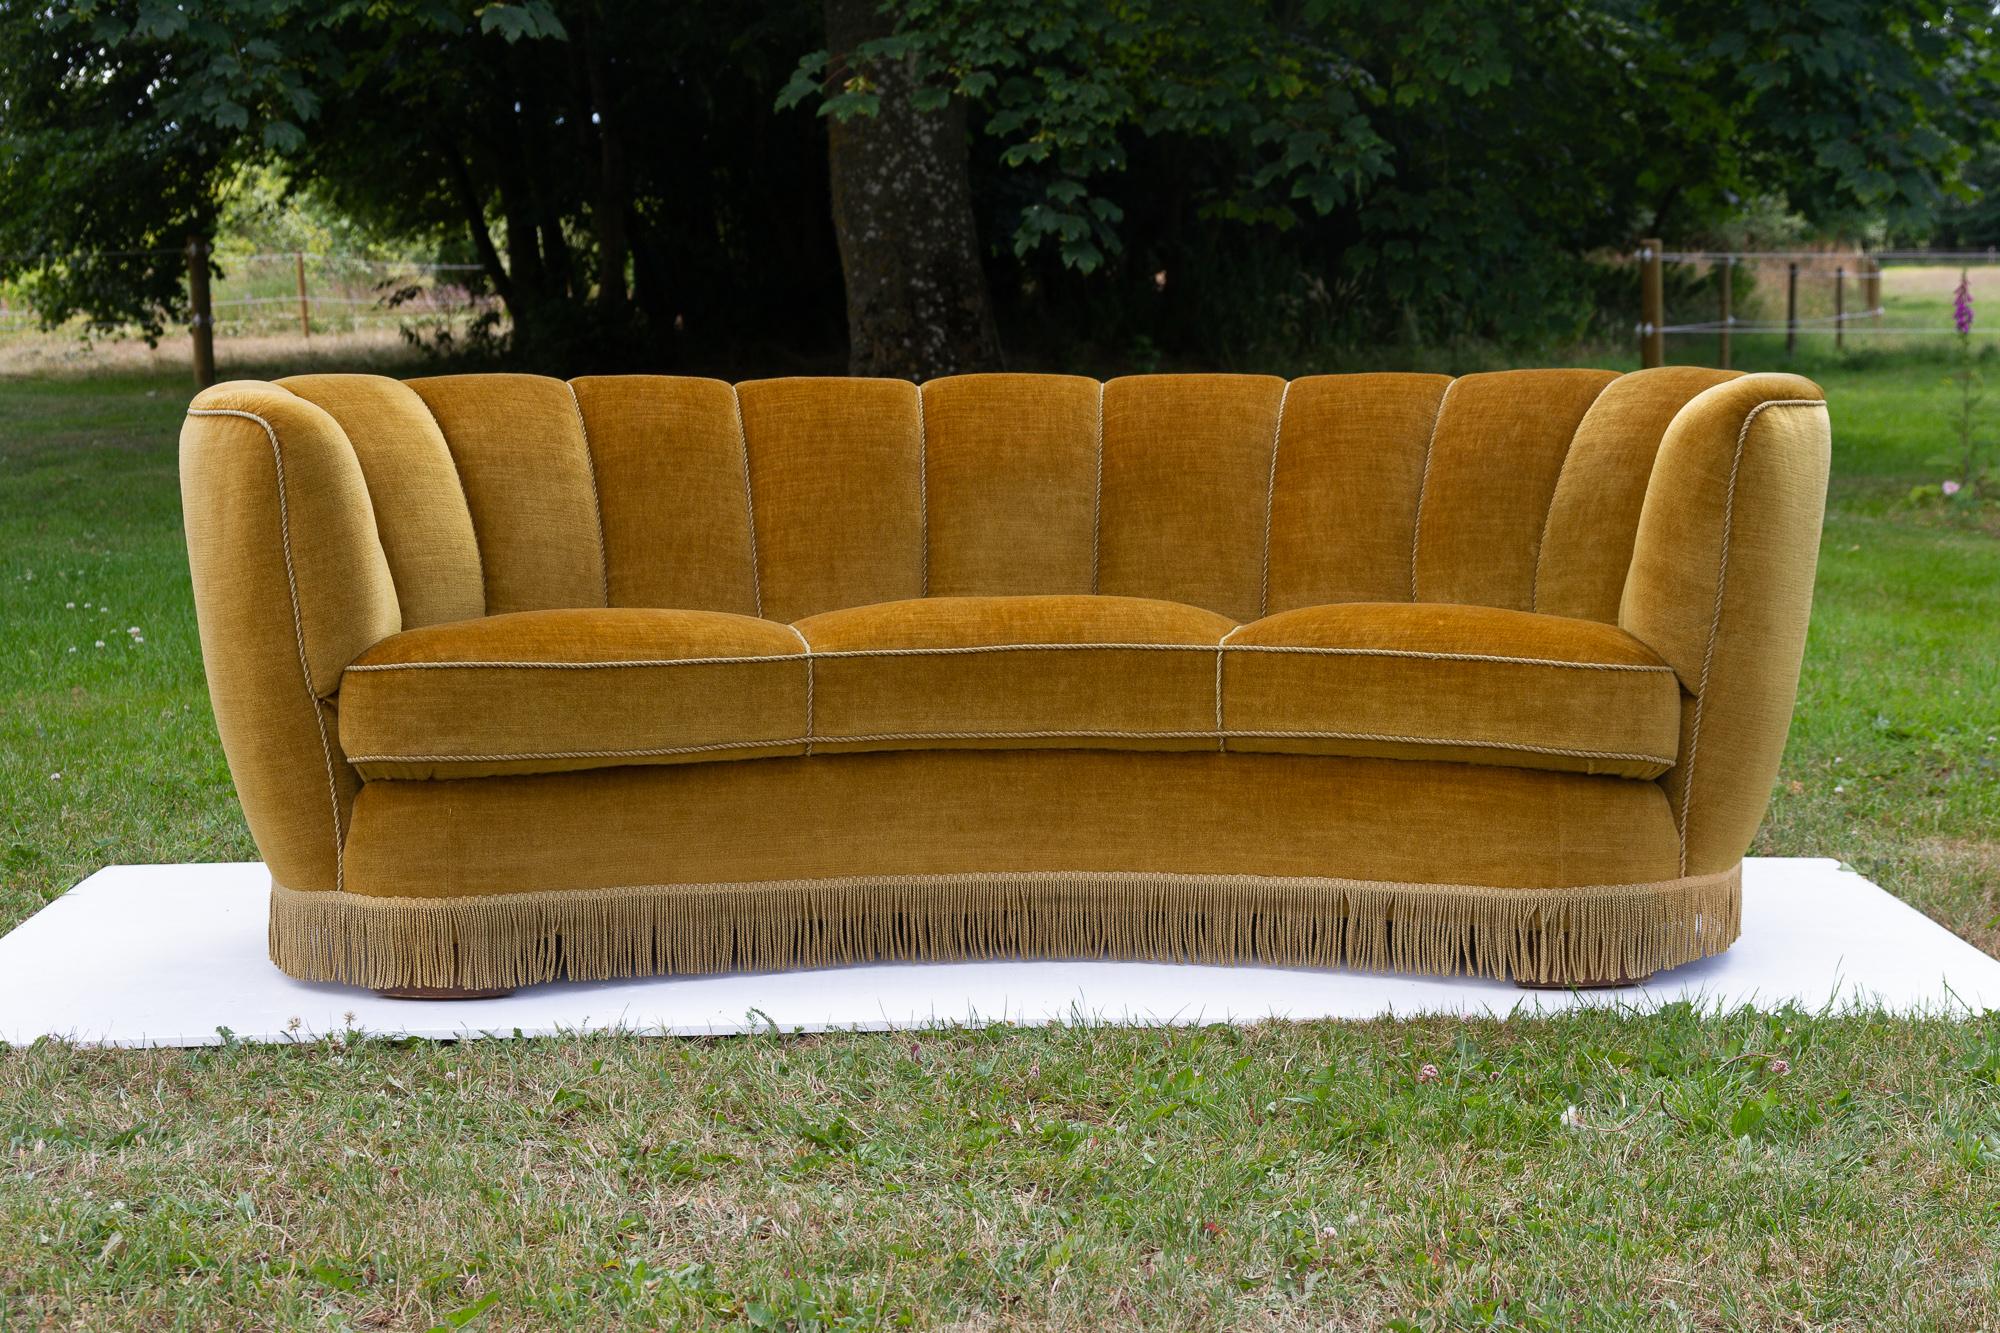 Vintage Danish velvet banana sofa, 1940s
Vintage Art Deco banana-shaped sofa upholstered in green/yellow/golden velvet made by Danish cabinetmaker in the 1940s. Curved three-seater with original spring and velour upholstery, base edged with